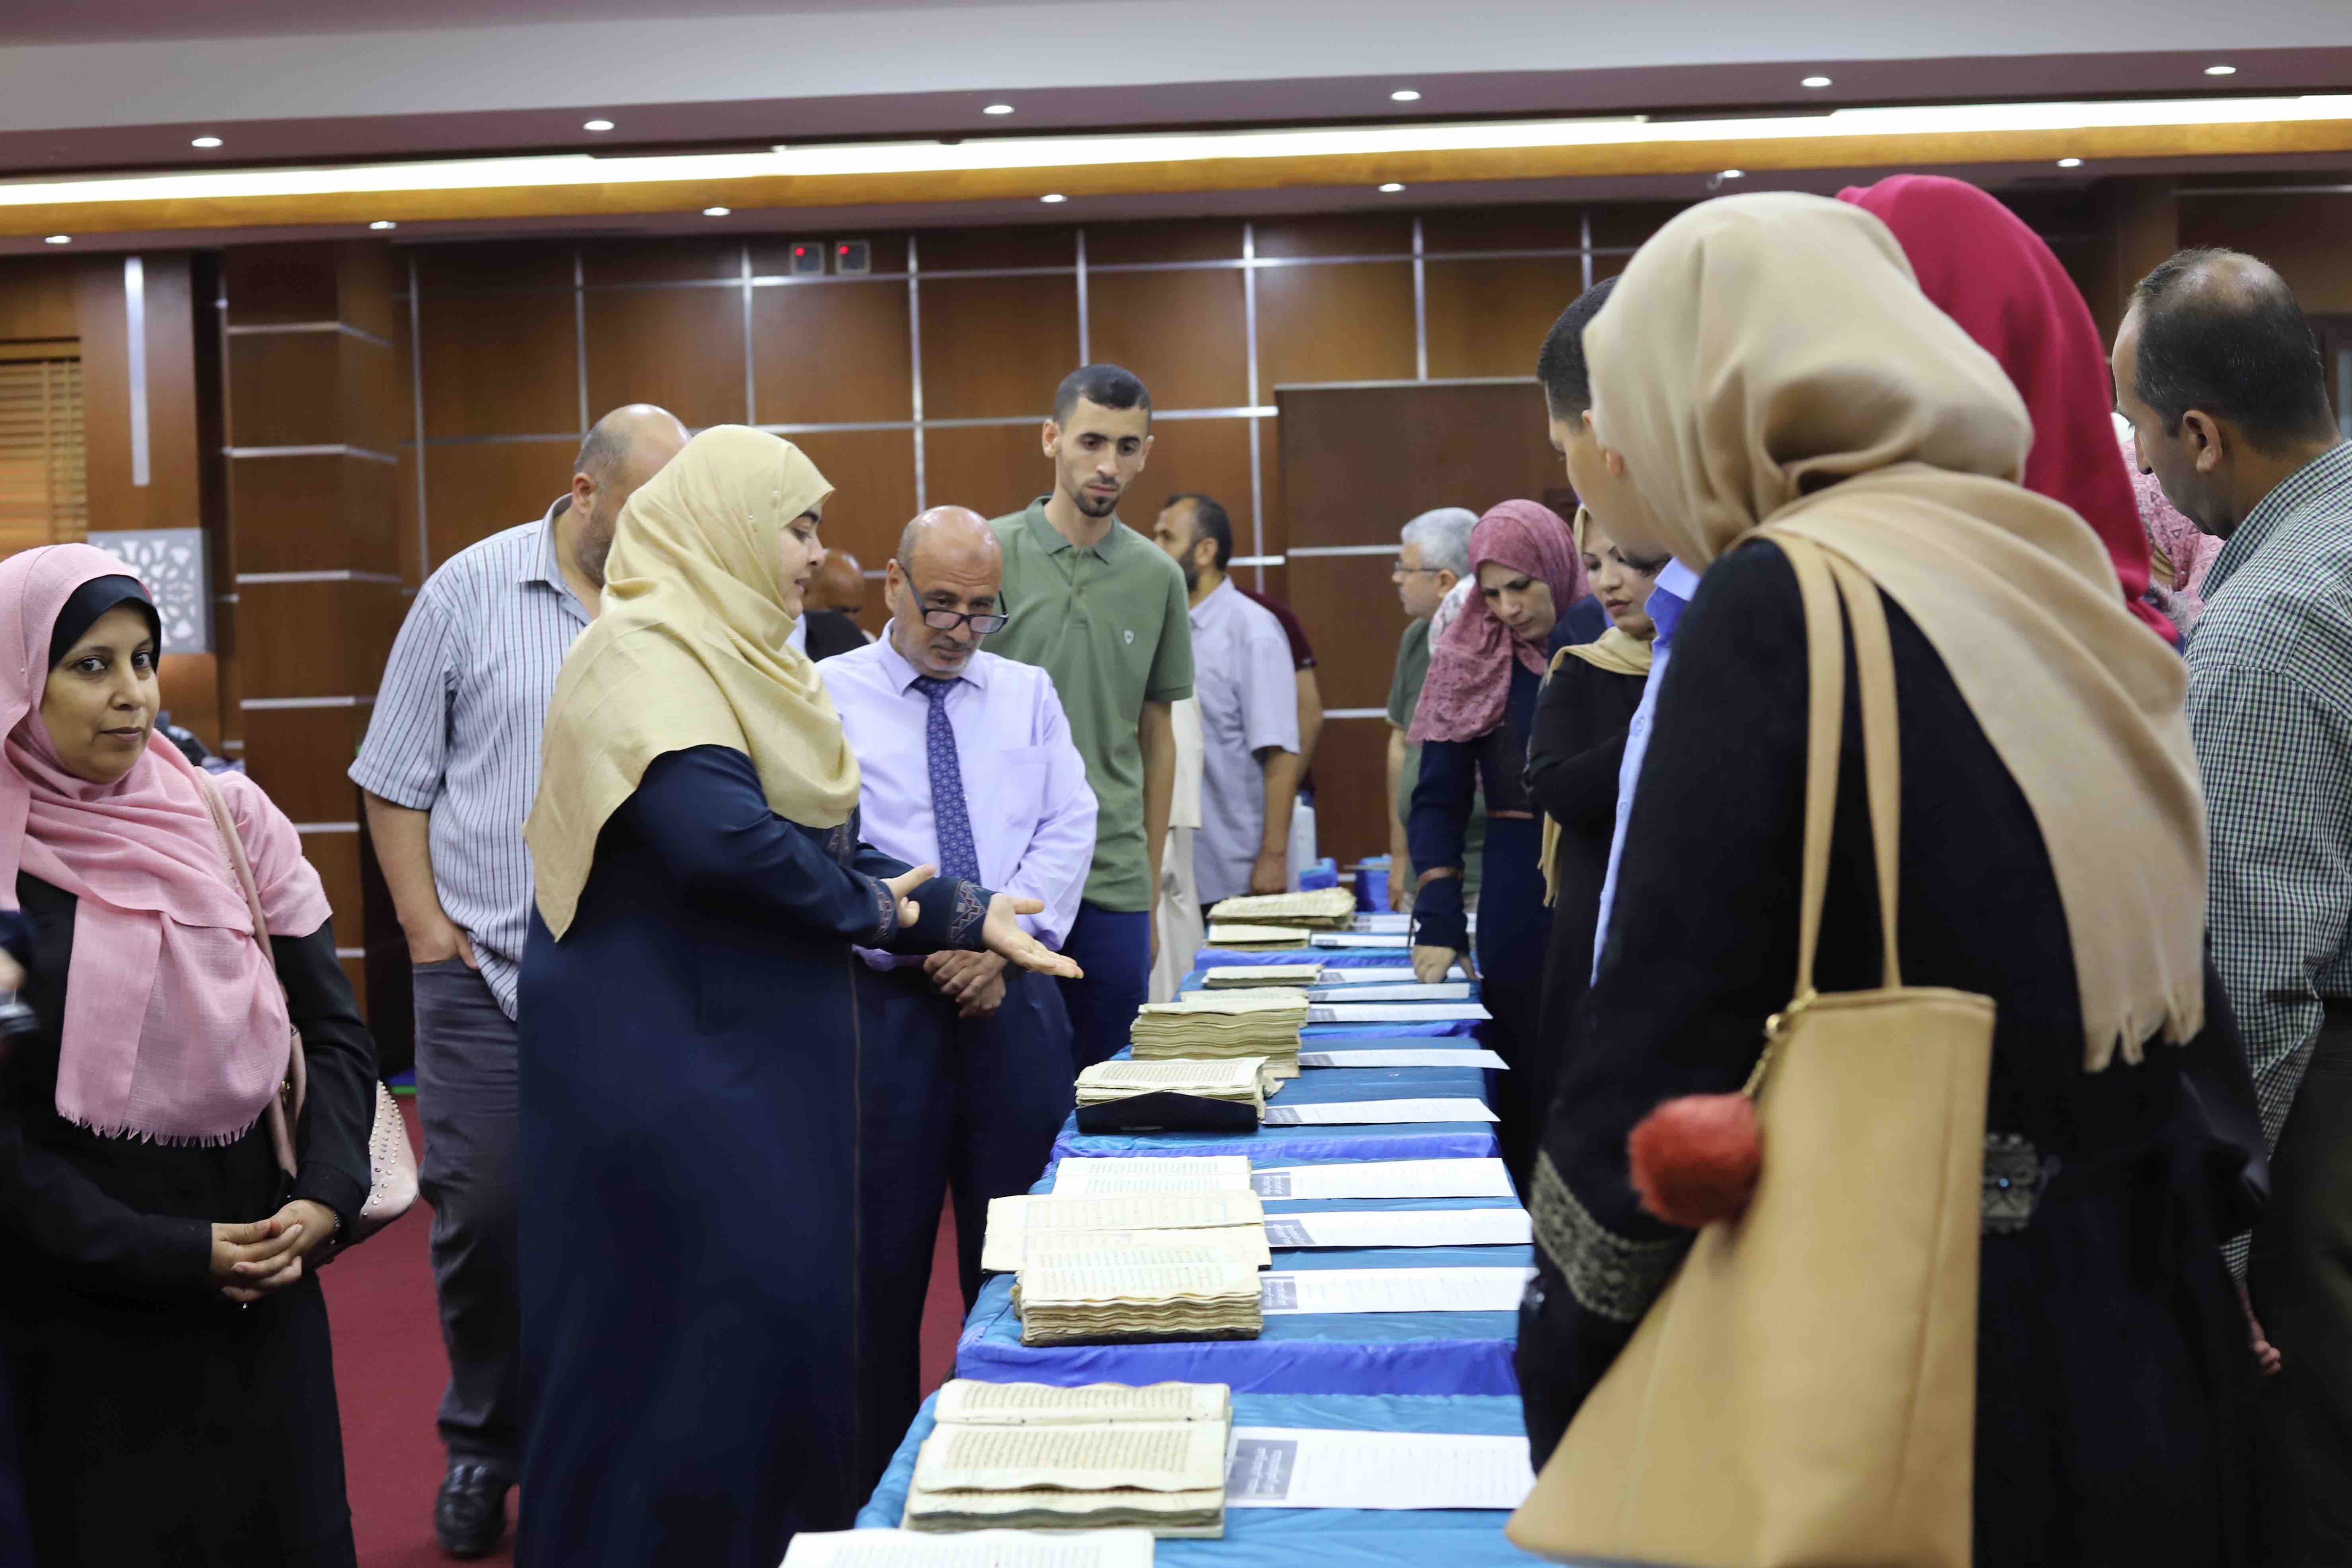 Abd-Allatif Abu-Hashim (center, in tie) presenting on the manuscripts to a group of students from the University College of Applied Sciences, Gaza